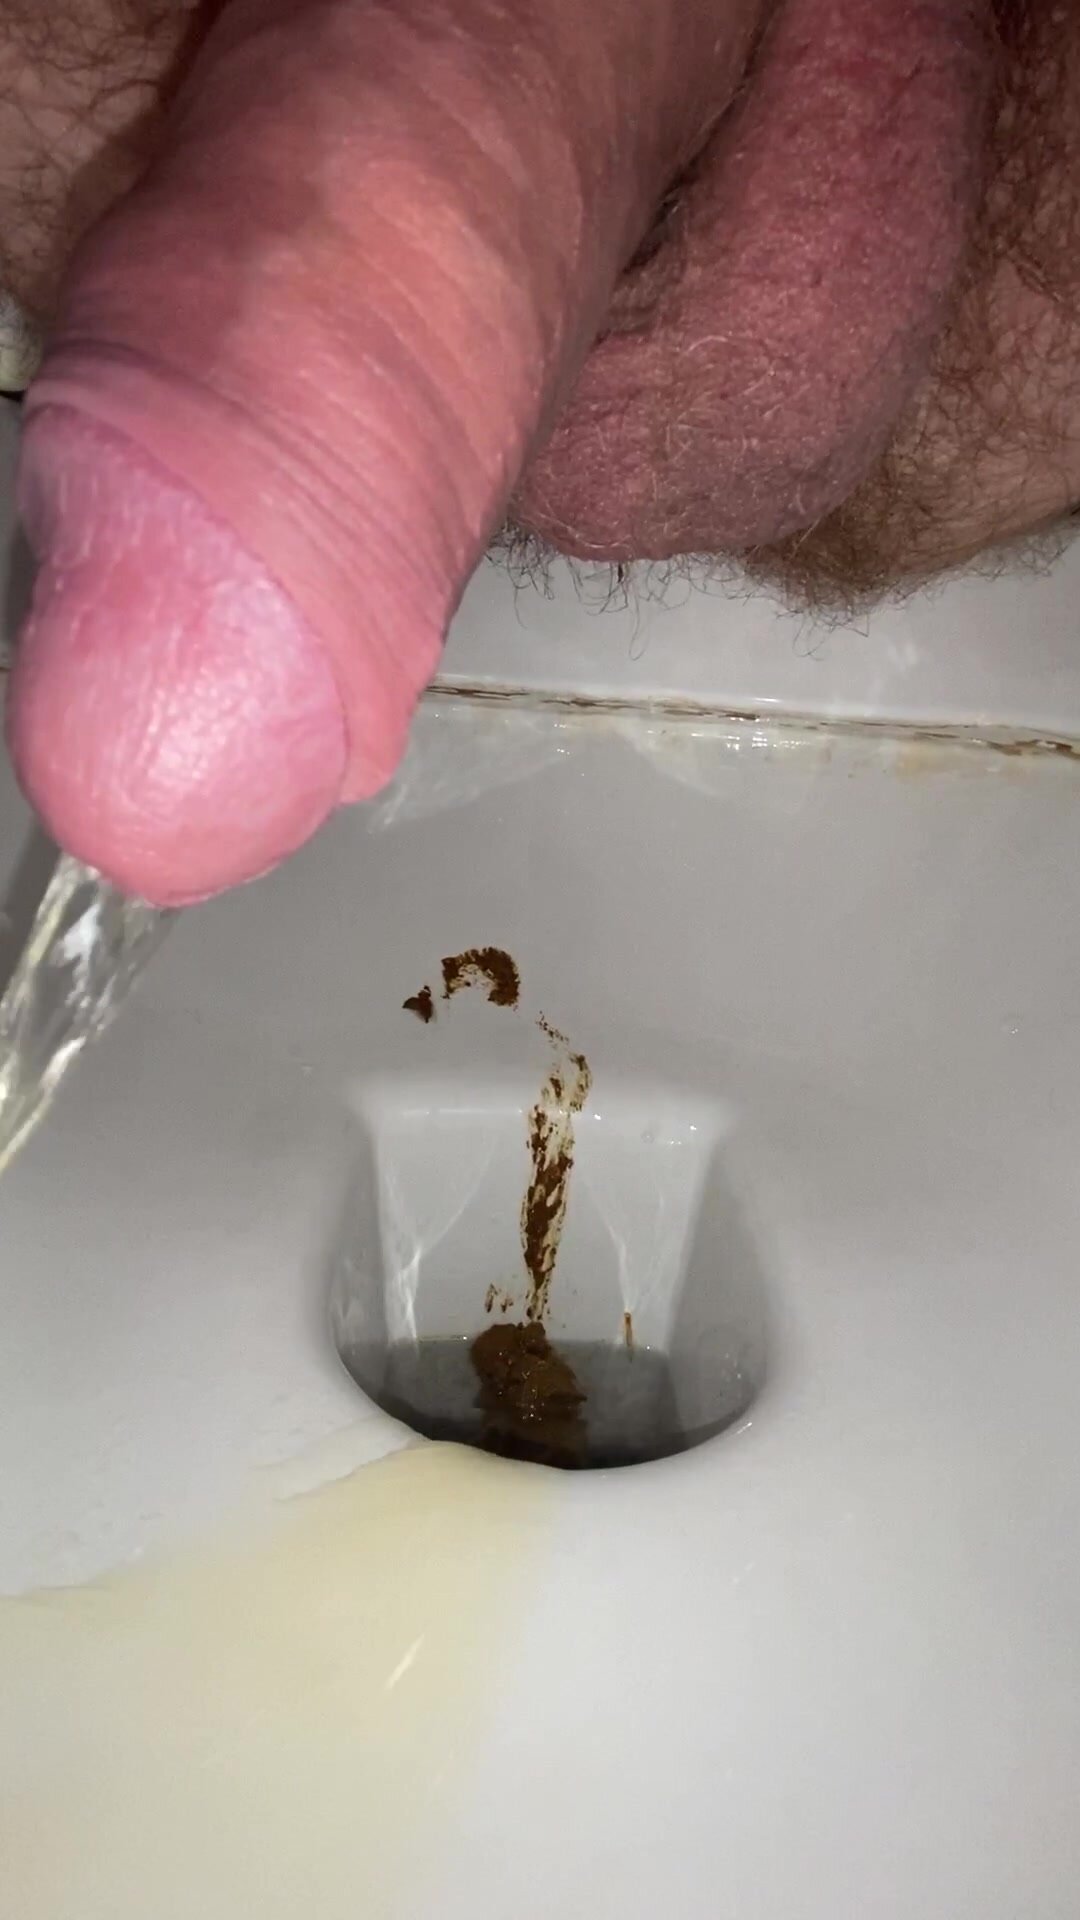 Urgent smooth shits and diarrhoea